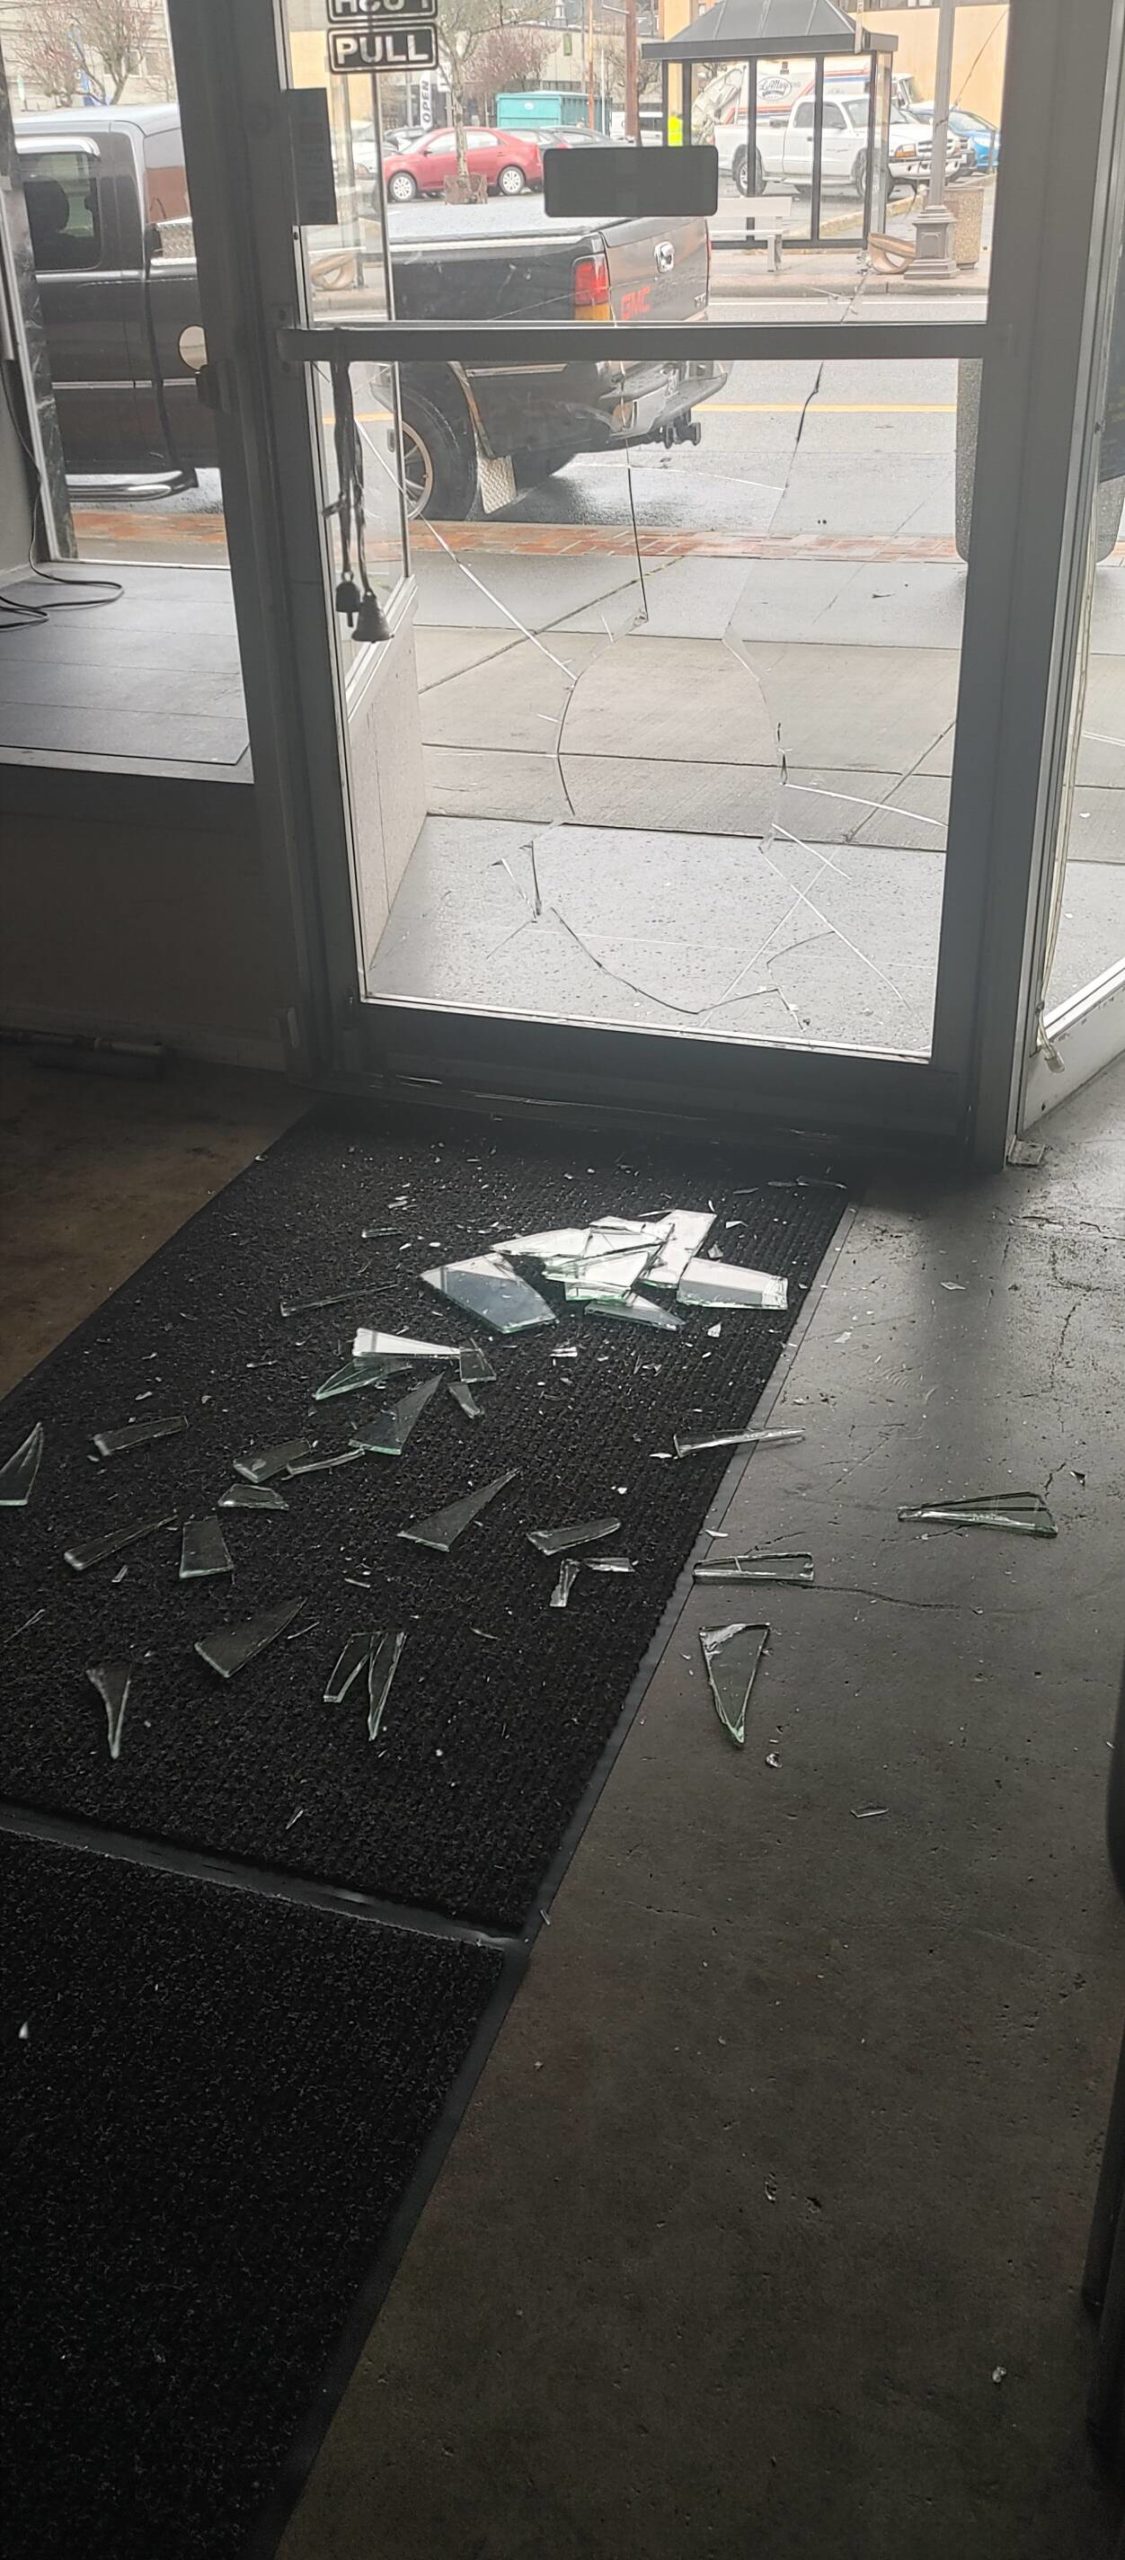 Courtesy Photo 
David Gleaves, owner of Deen Dogs, had to call his landlord to get his glass door fixed after a vandal “punched” the front door to his business on the evening of April 20, 2022. Gleaves said it took about a week to replace the glass, largely because of the frame and the type of glass used.